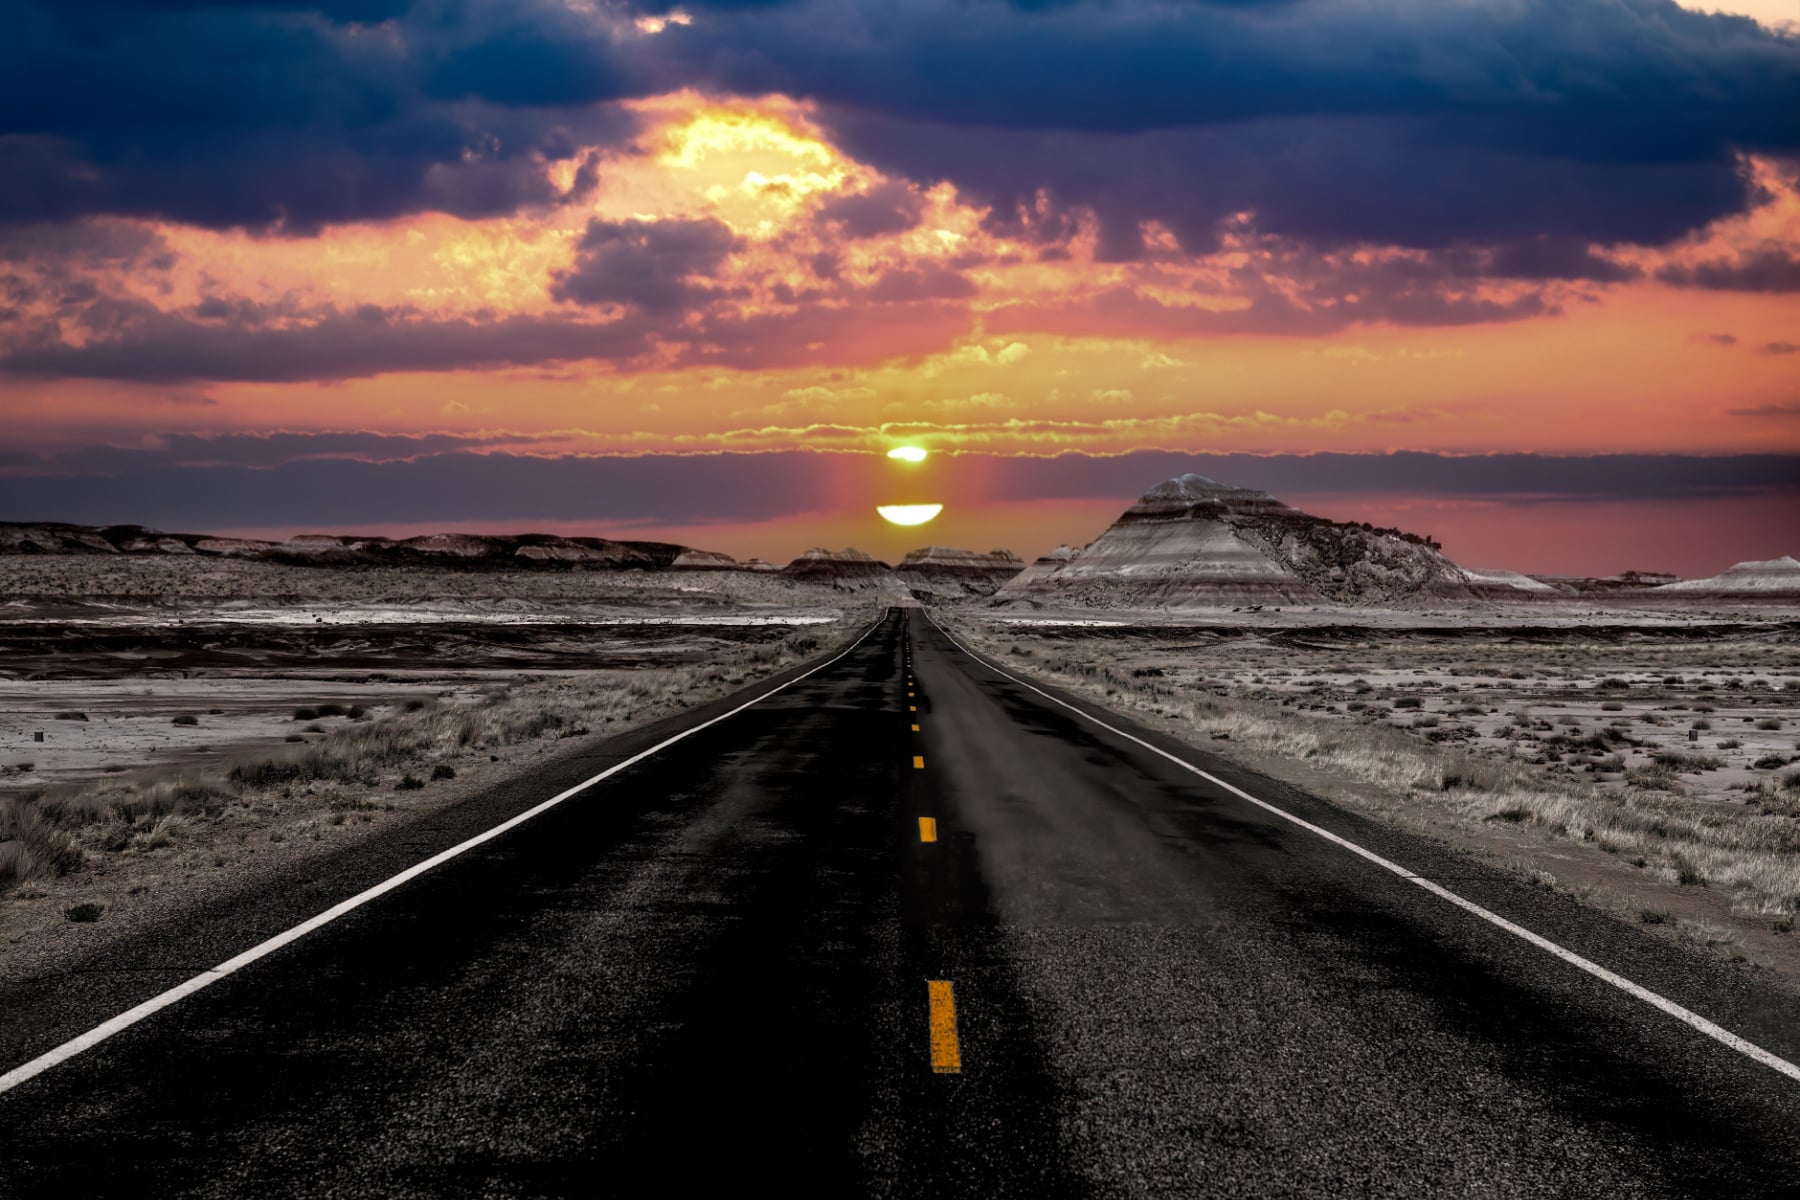 The sunset over the road through Petrified Forest National Park.